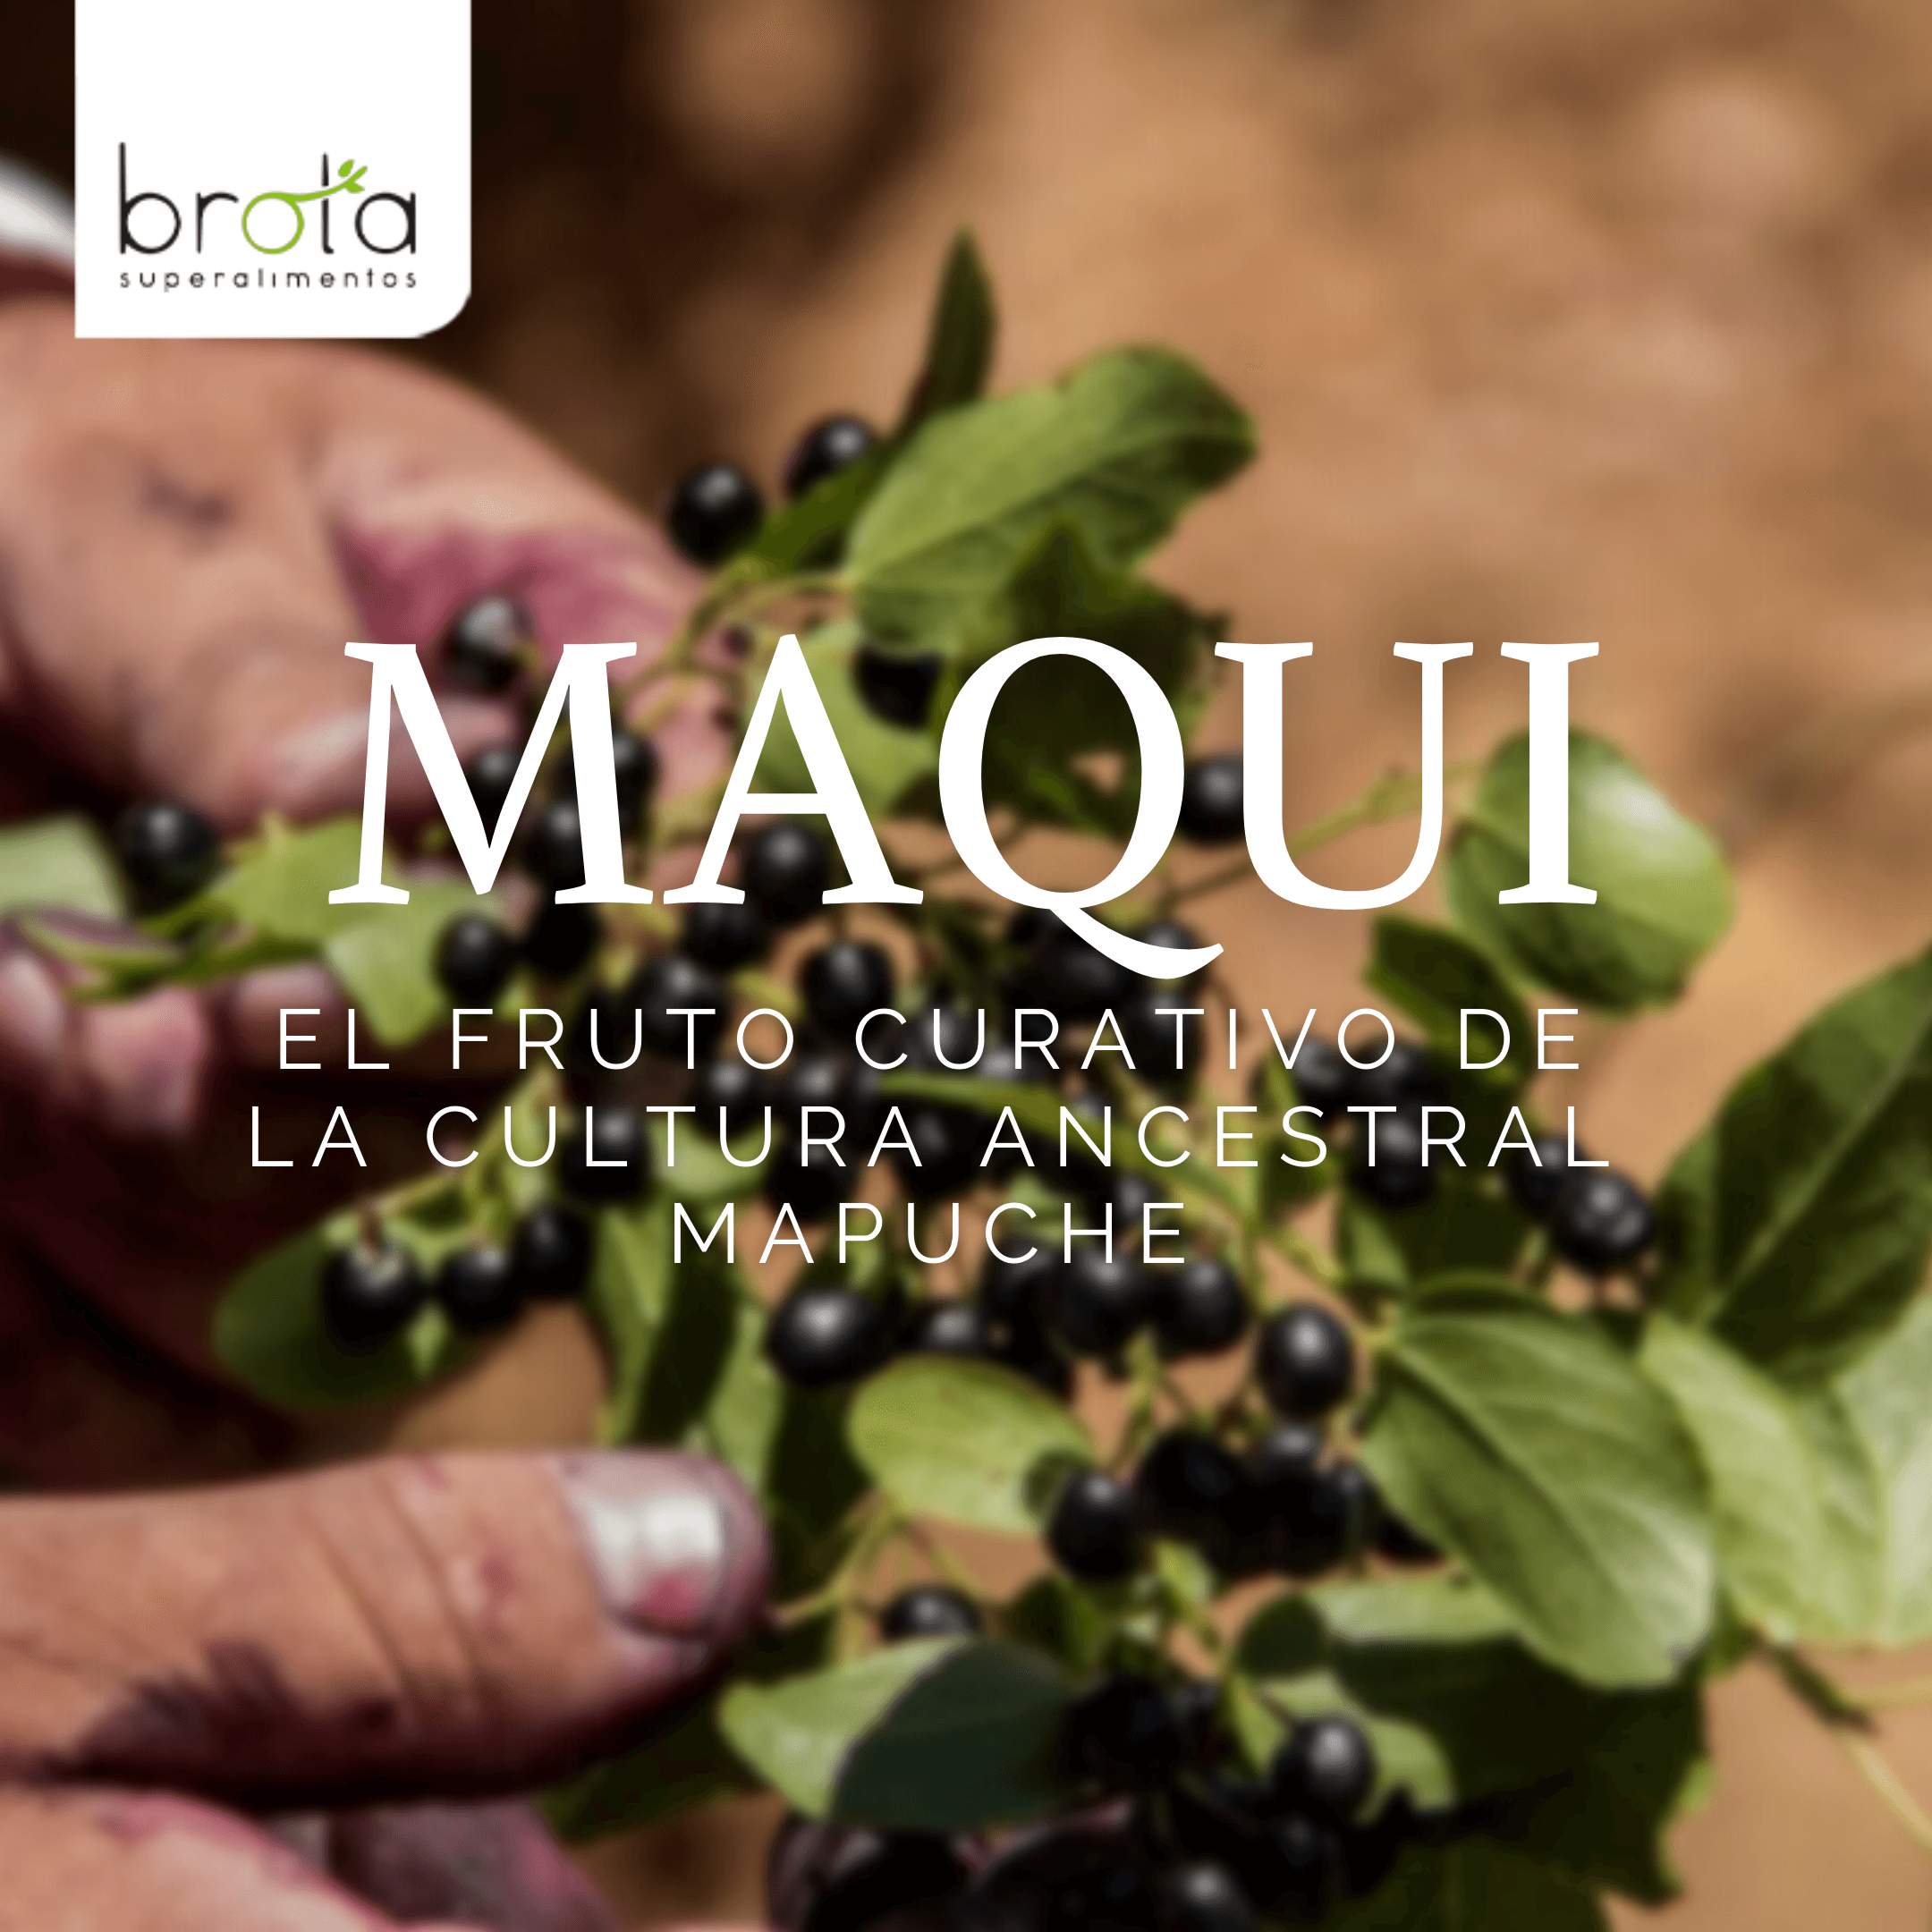 Maqui, the healing fruit of the ancestral Mapuche culture